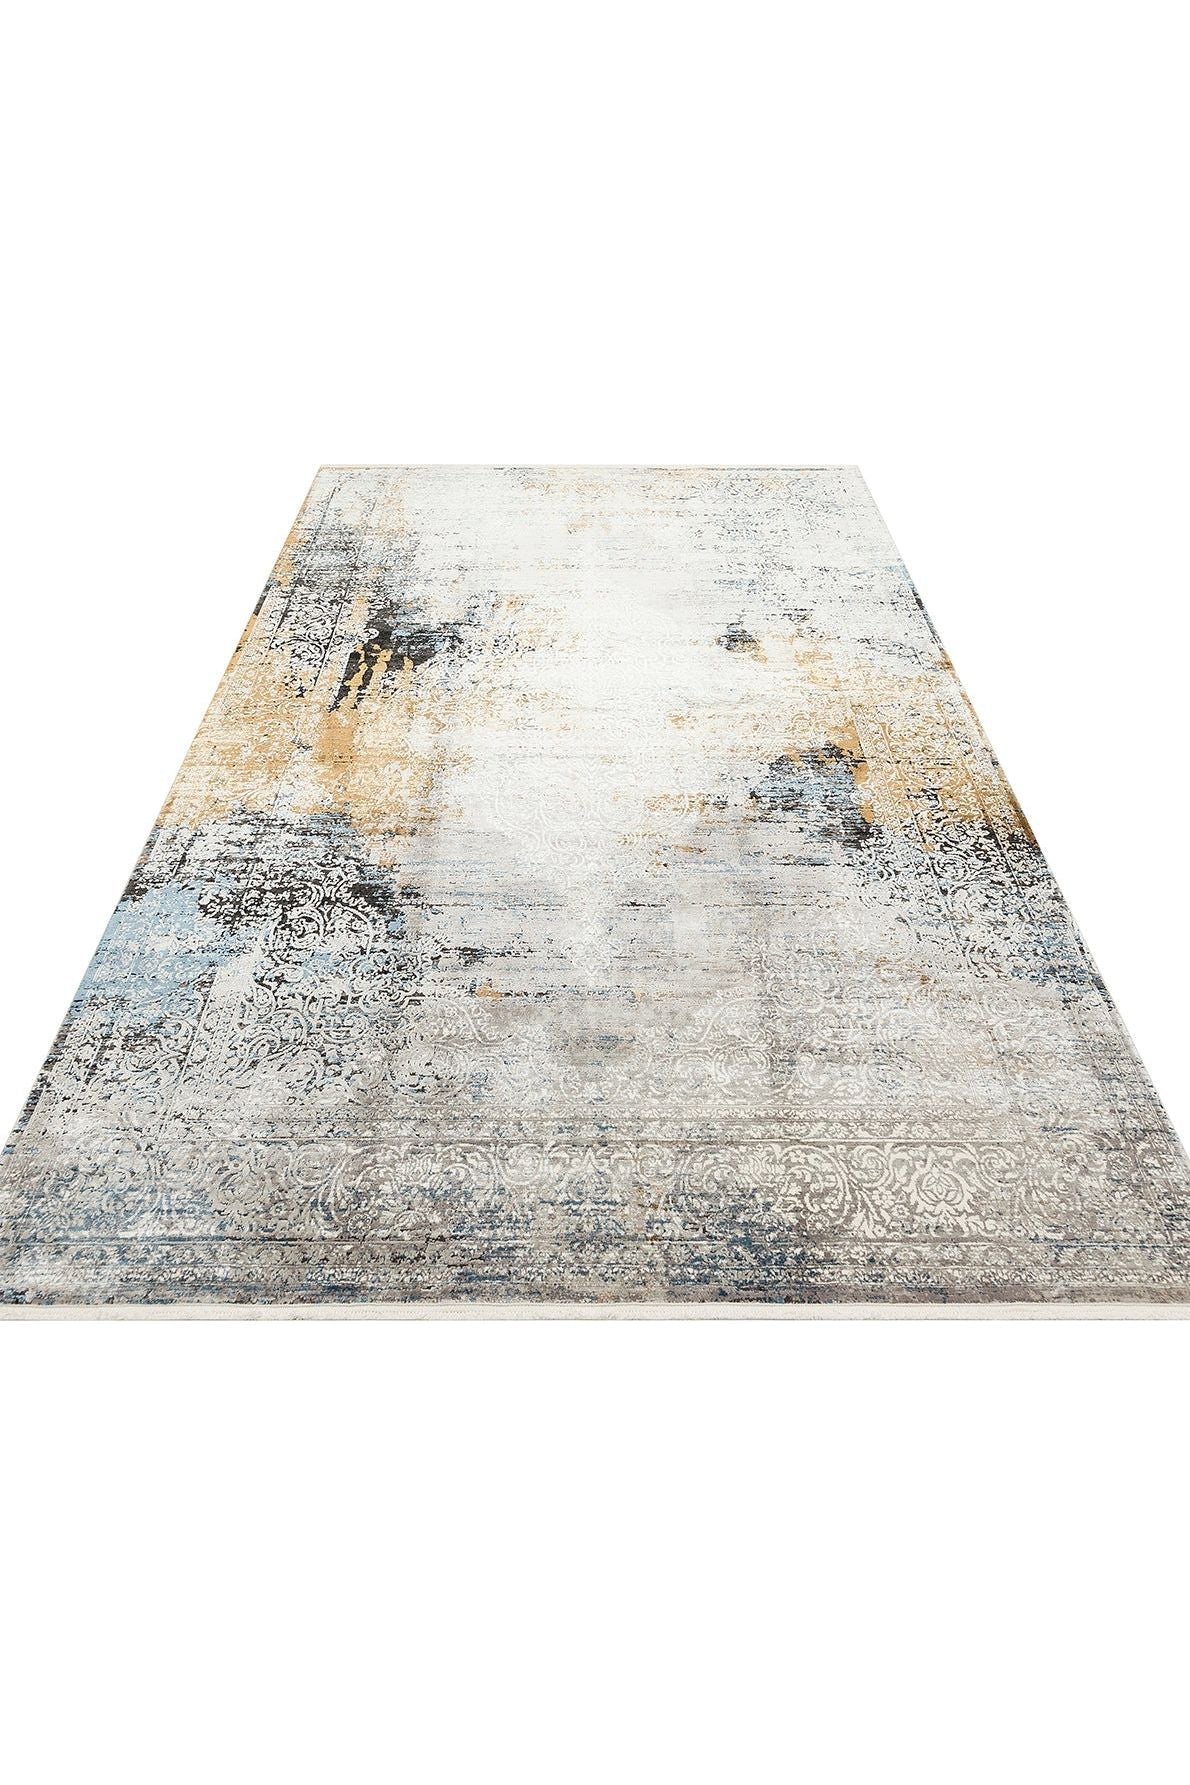 #Turkish_Carpets_Rugs# #Modern_Carpets# #Abrash_Carpets#High Density Woven Modern Made Carpet With Acrylic And ViscosePlm 04 Grey Xw